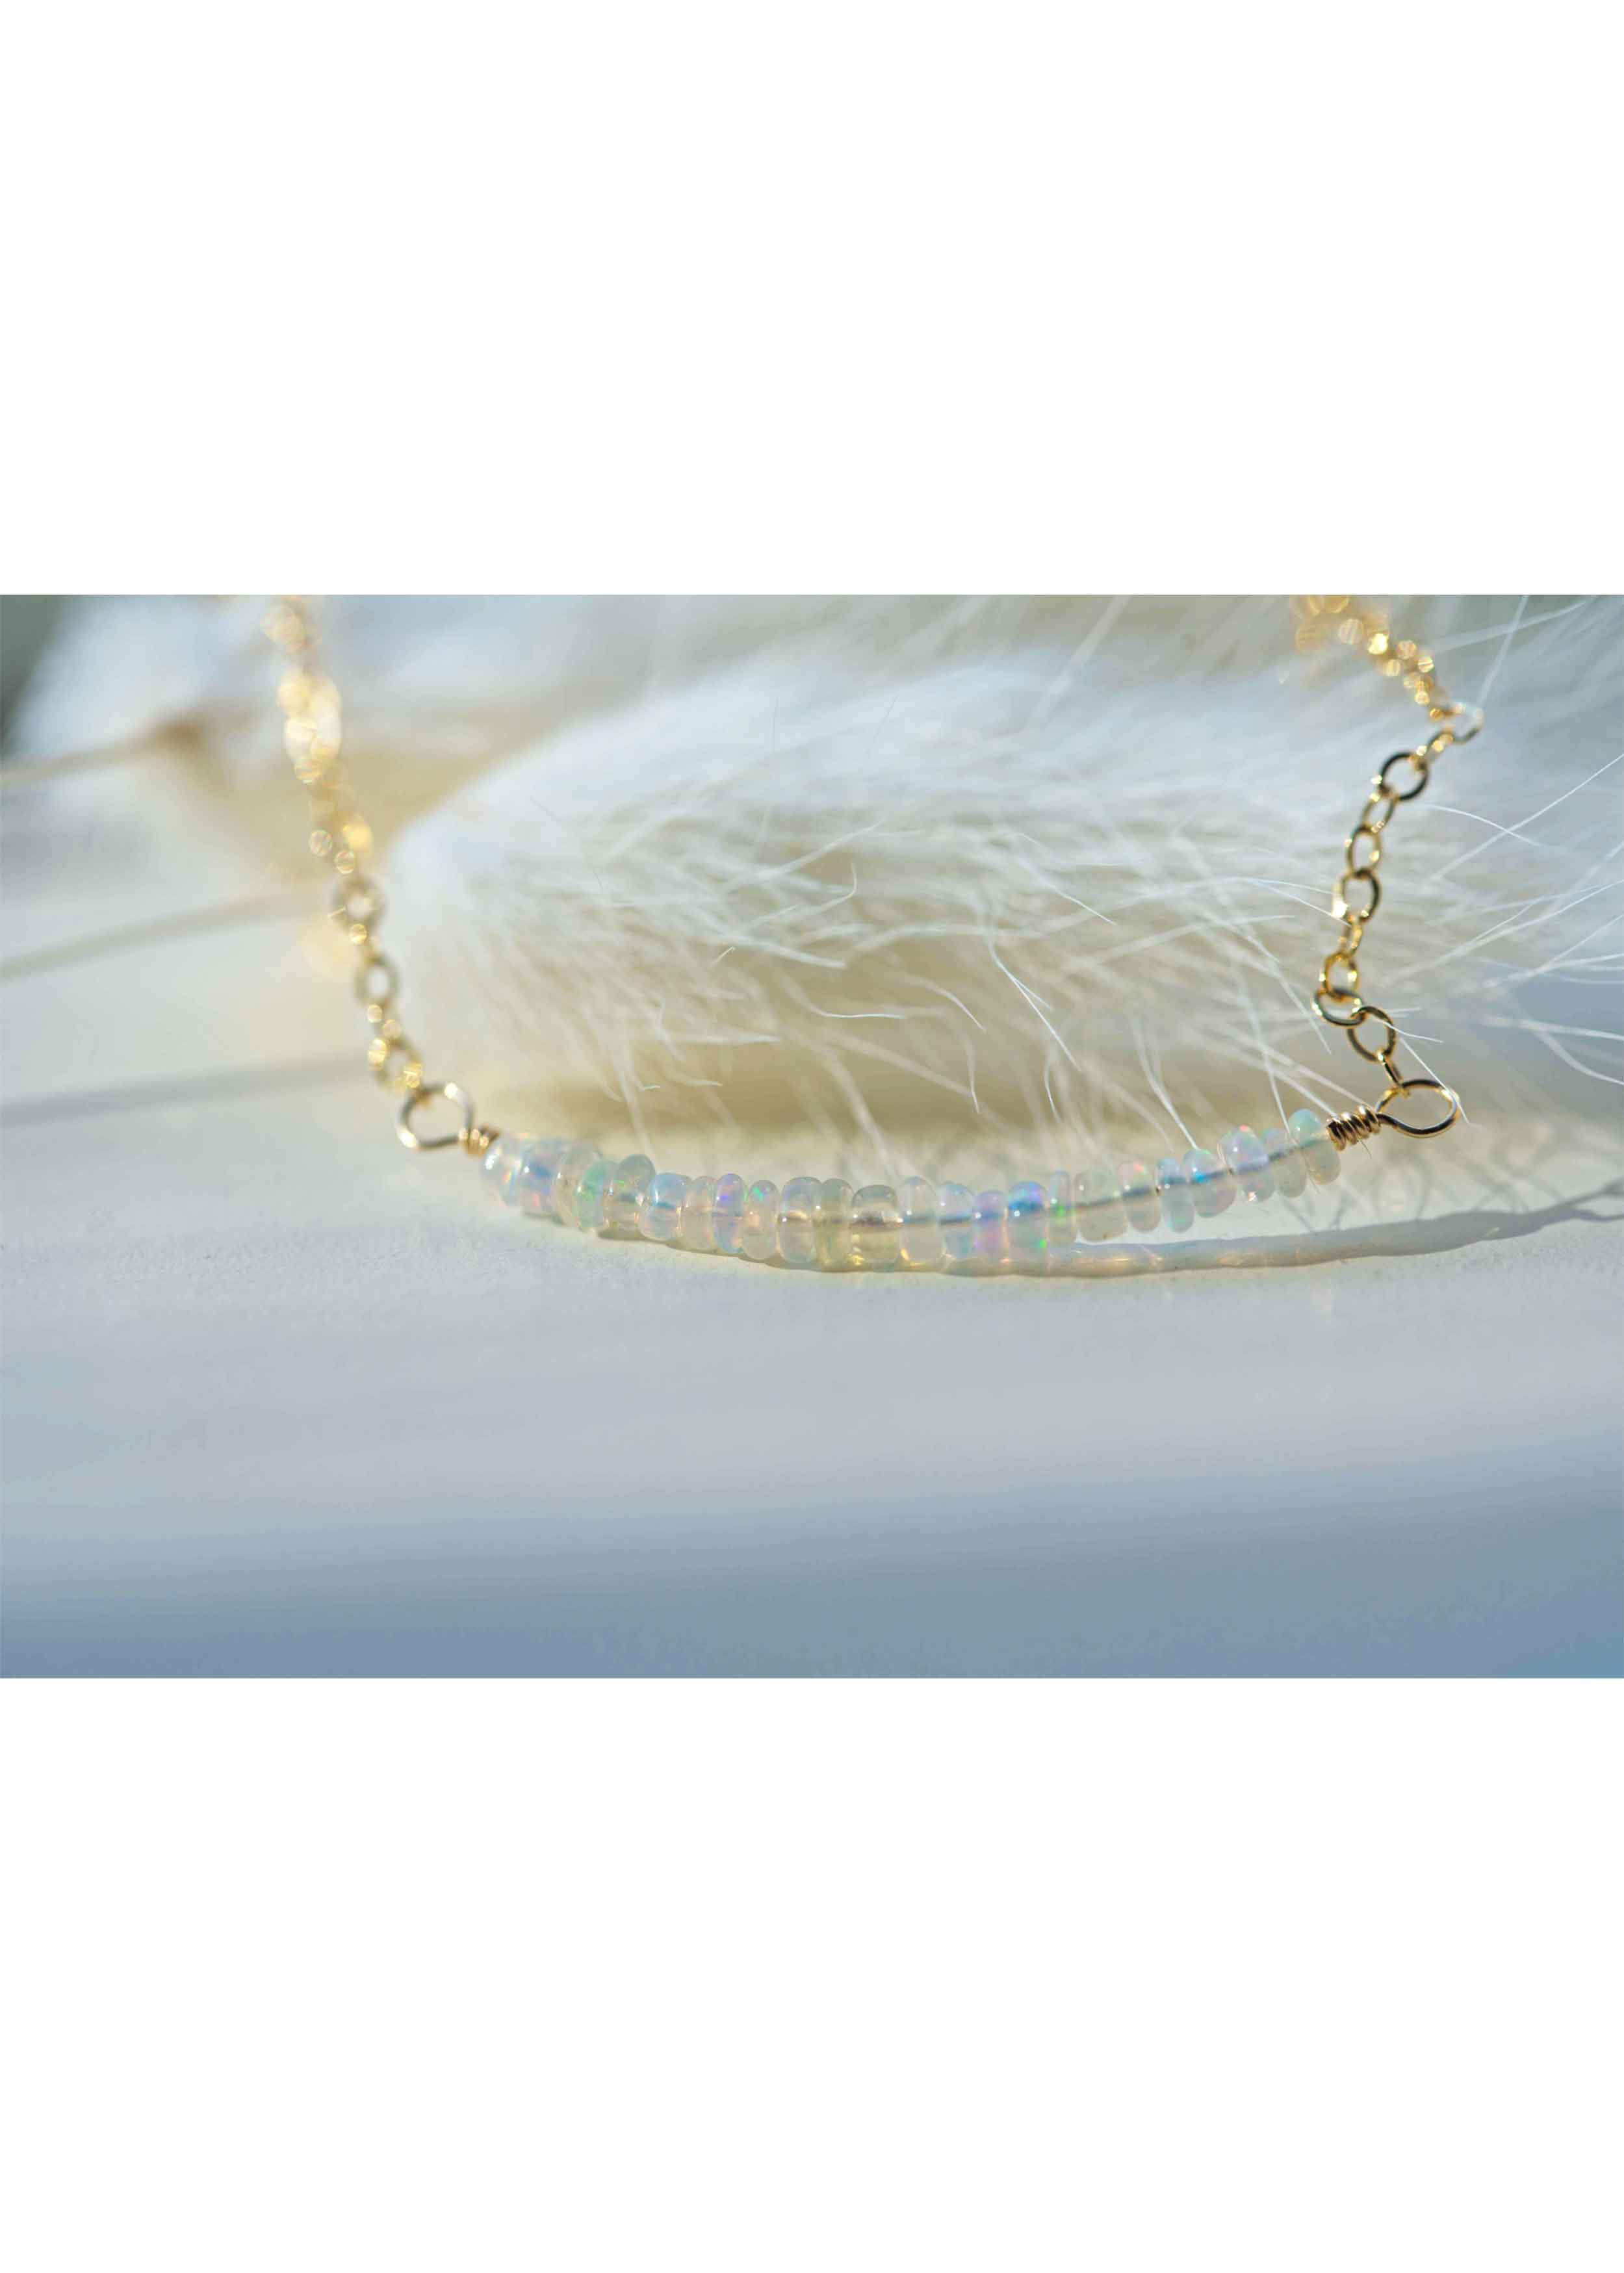 genuine opal necklace in gold filled curved bar necklace